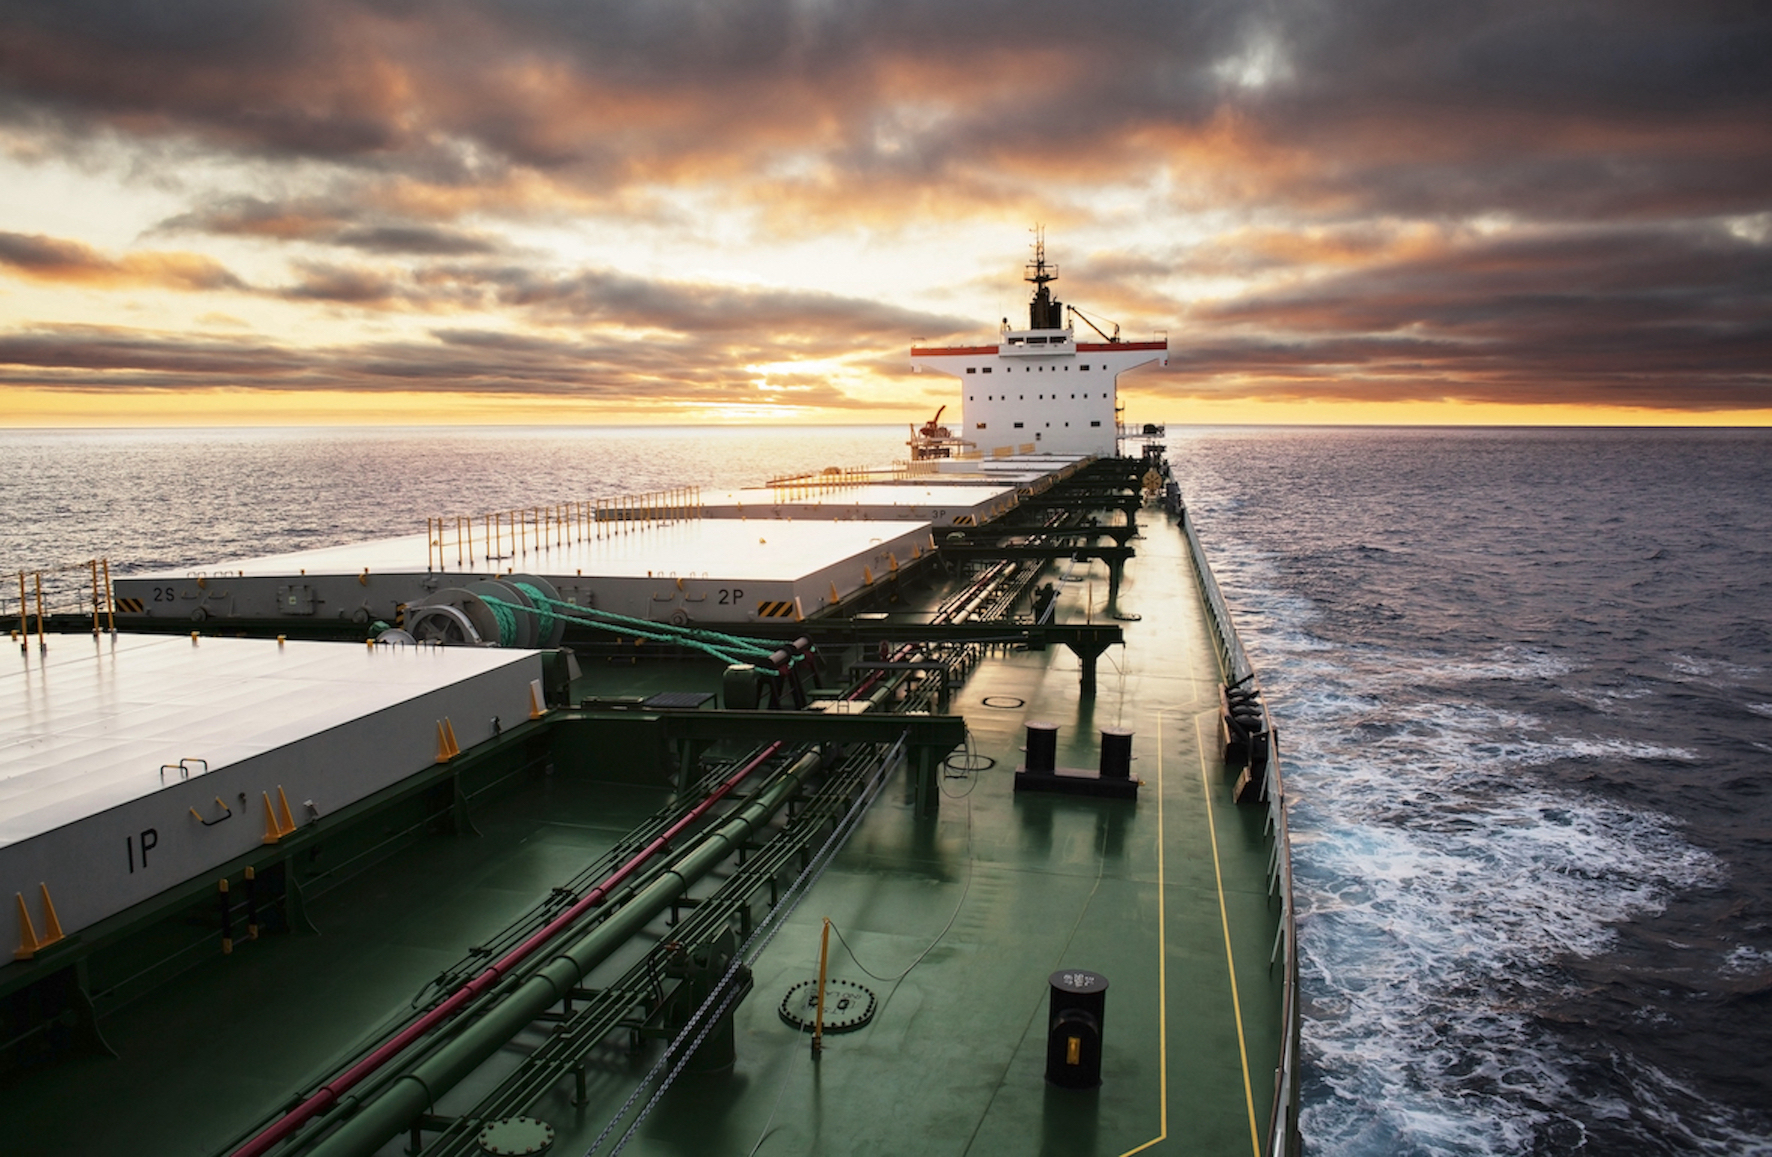 Marine underwriters face significant challenges amid industry headwinds